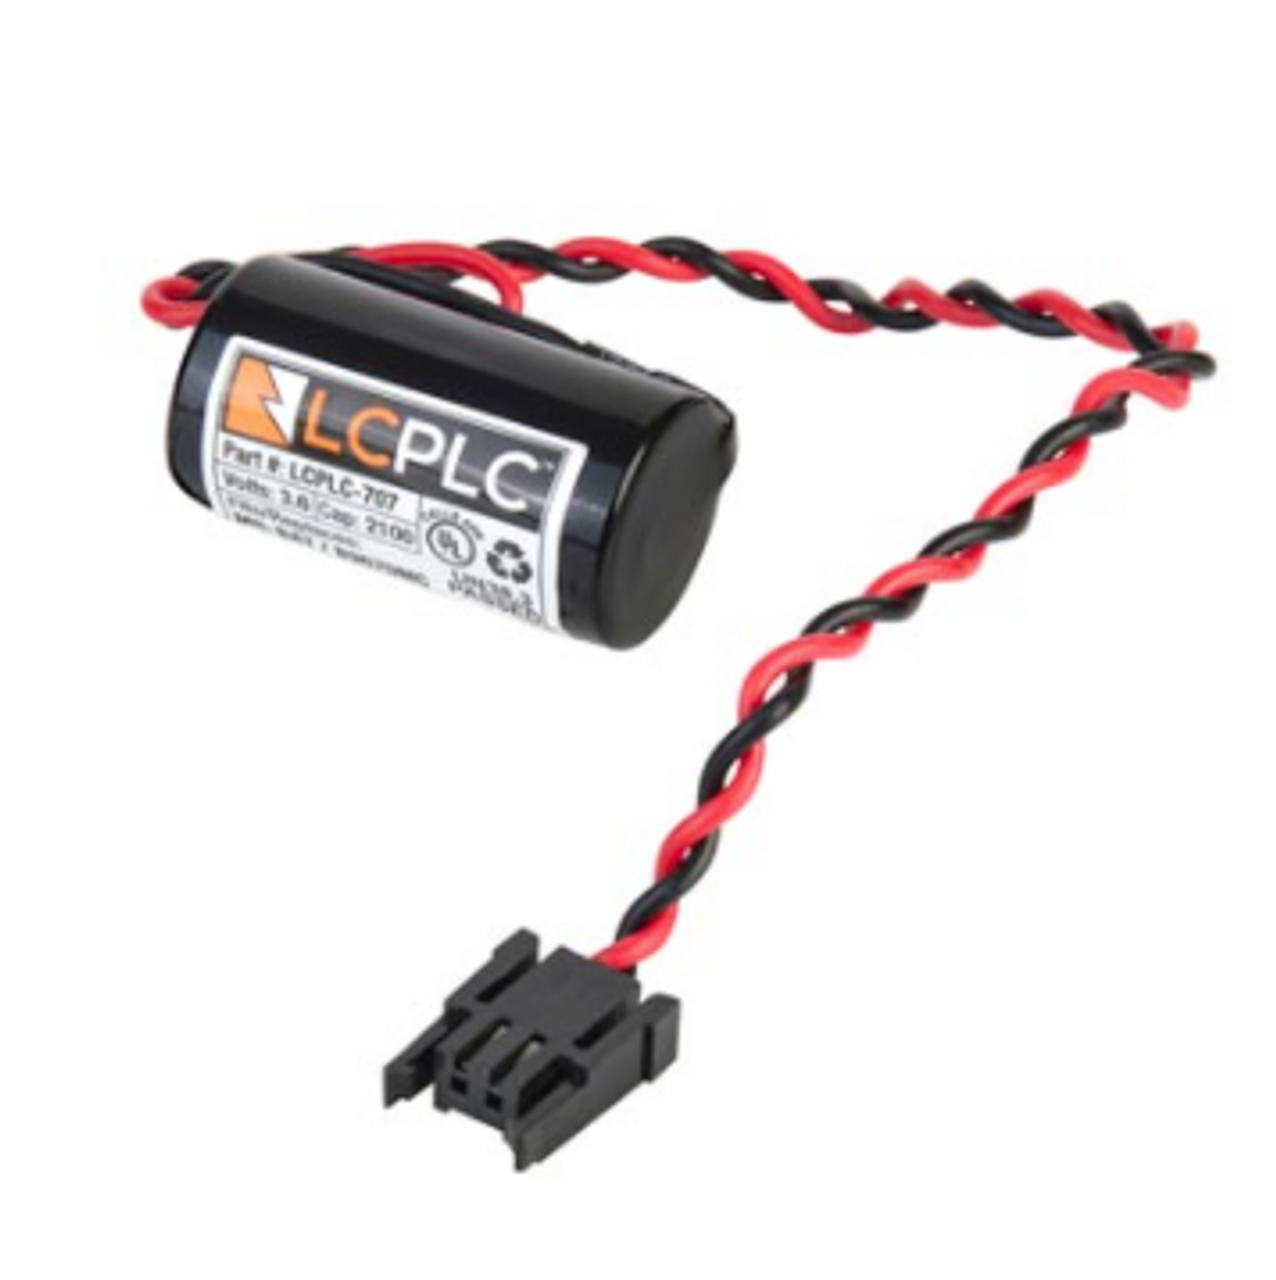 LCPLC LCPLC-707 Battery